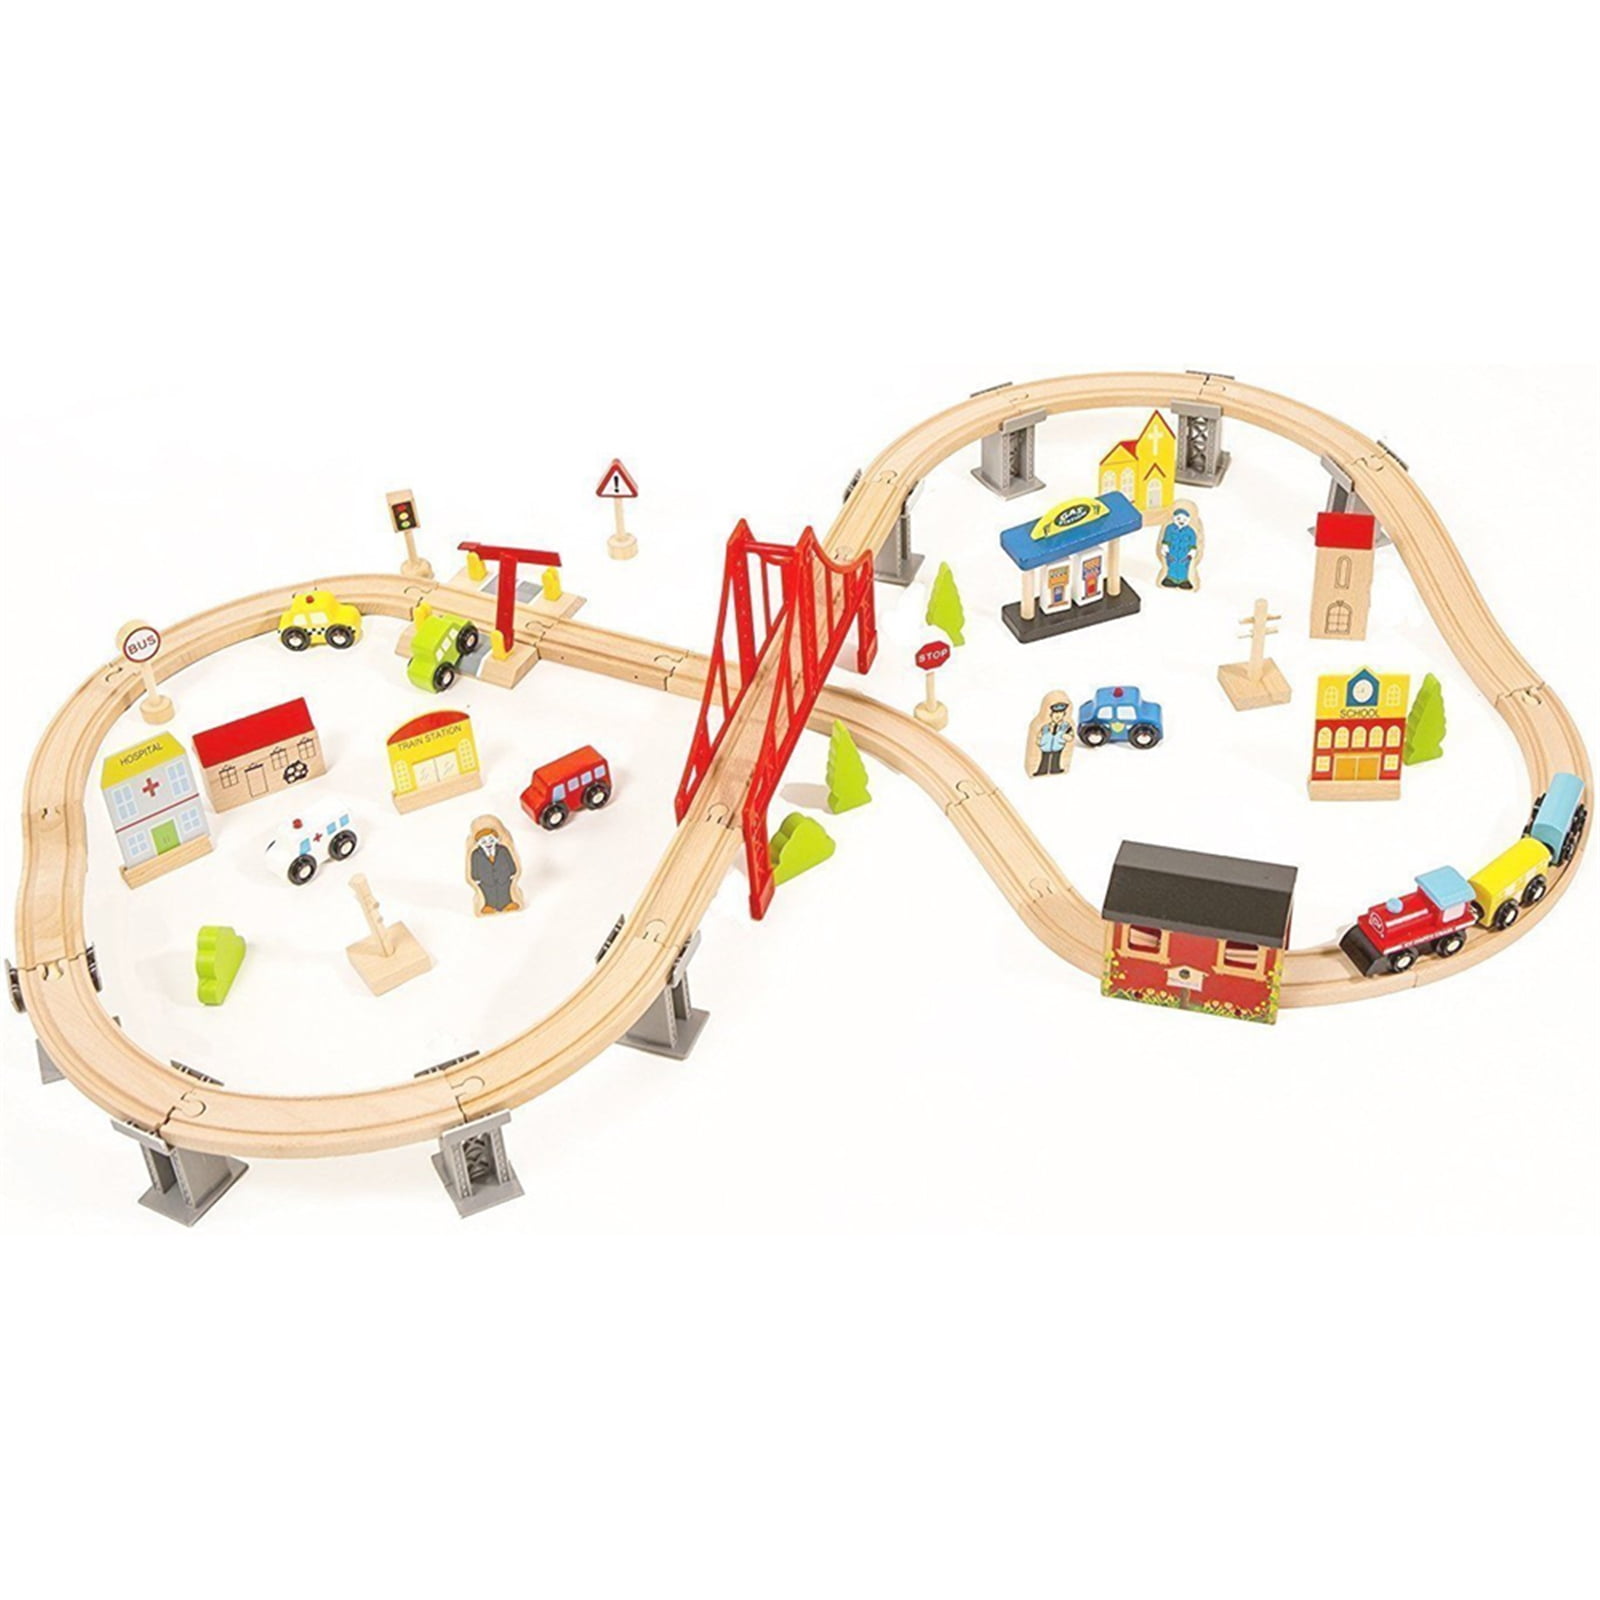 Details about   70pcs Wooden Train Set Learning Toy Kids Children Fun Road Crossing Track... 